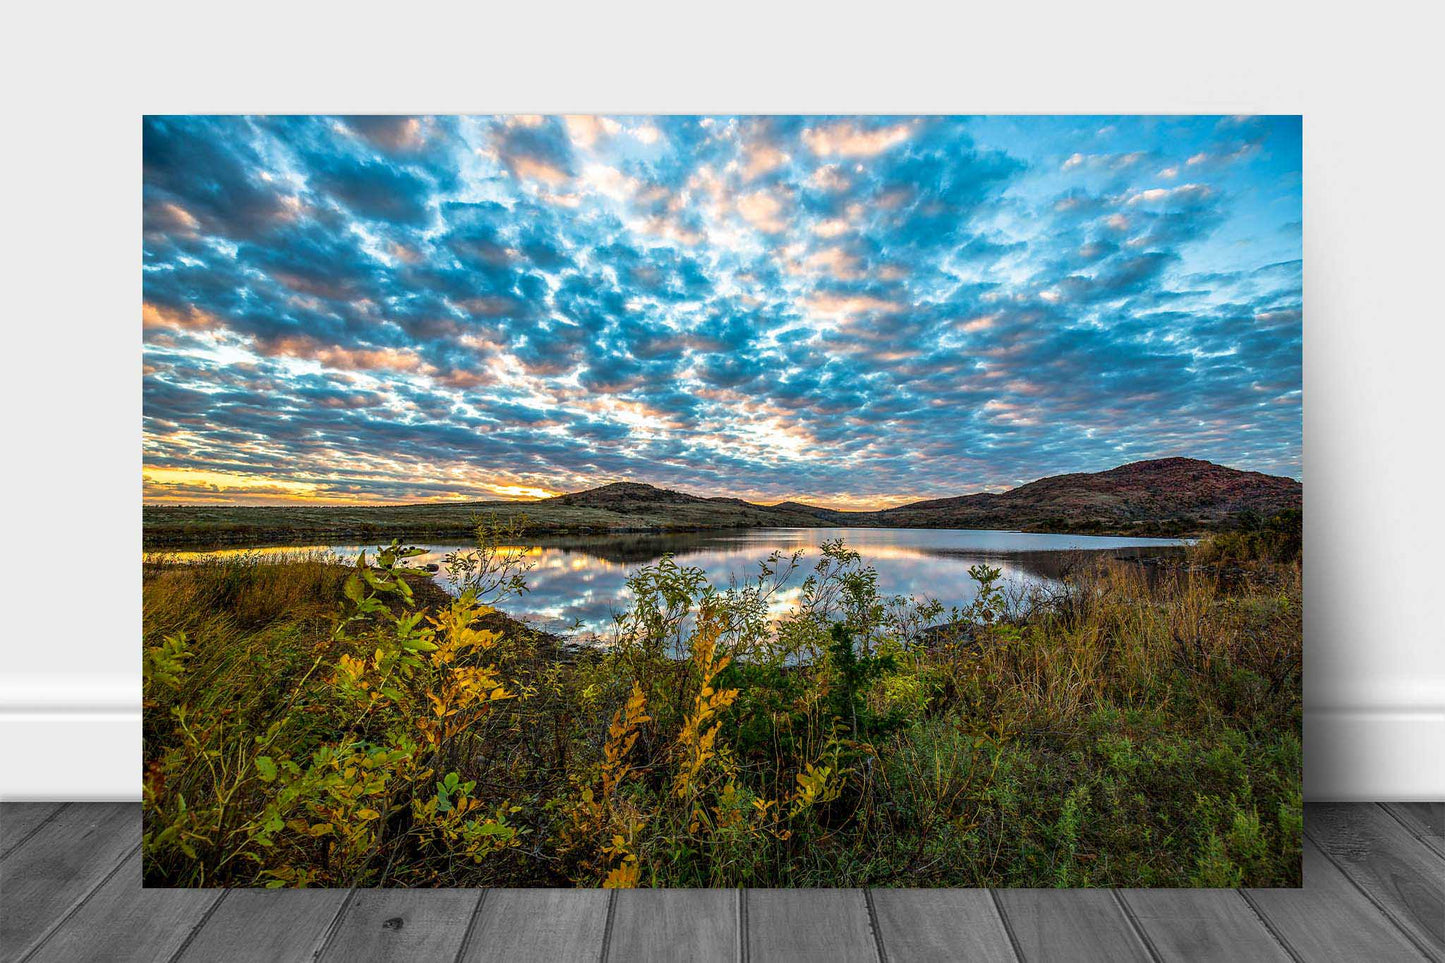 Landscape metal print of a scenic sky over fall color at sunset on an autumn evening at Lake Jed Johnson in the Wichita Mountains of Oklahoma by Sean Ramsey of Southern Plains Photography.